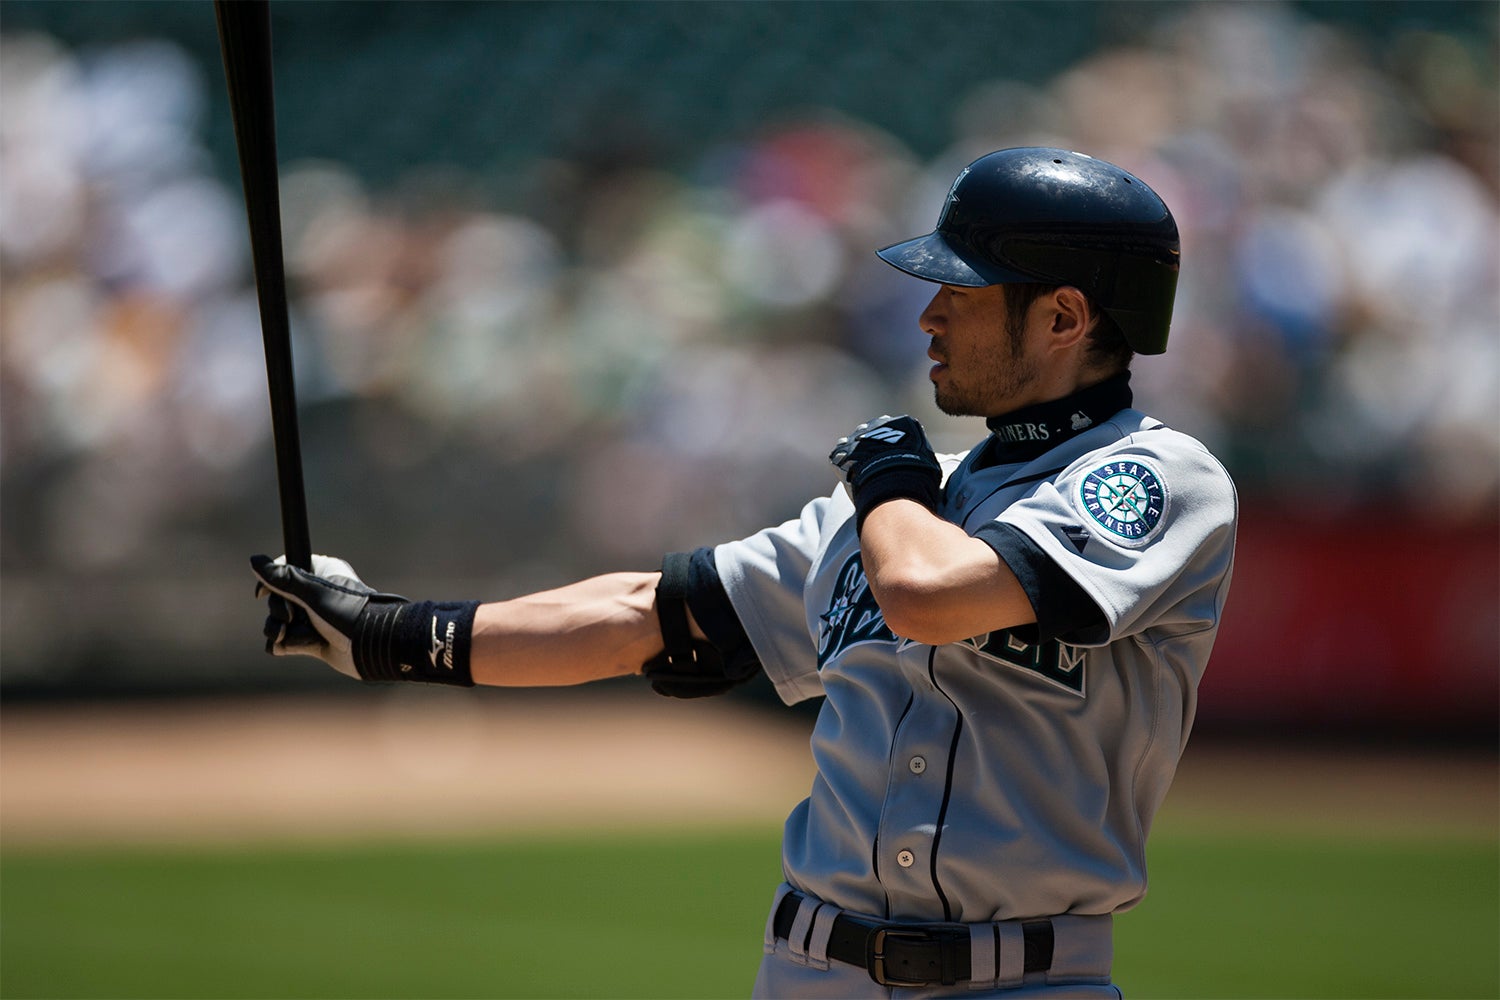 #Shortstops: Ichiro’s Theme: A Love Letter from Seattle